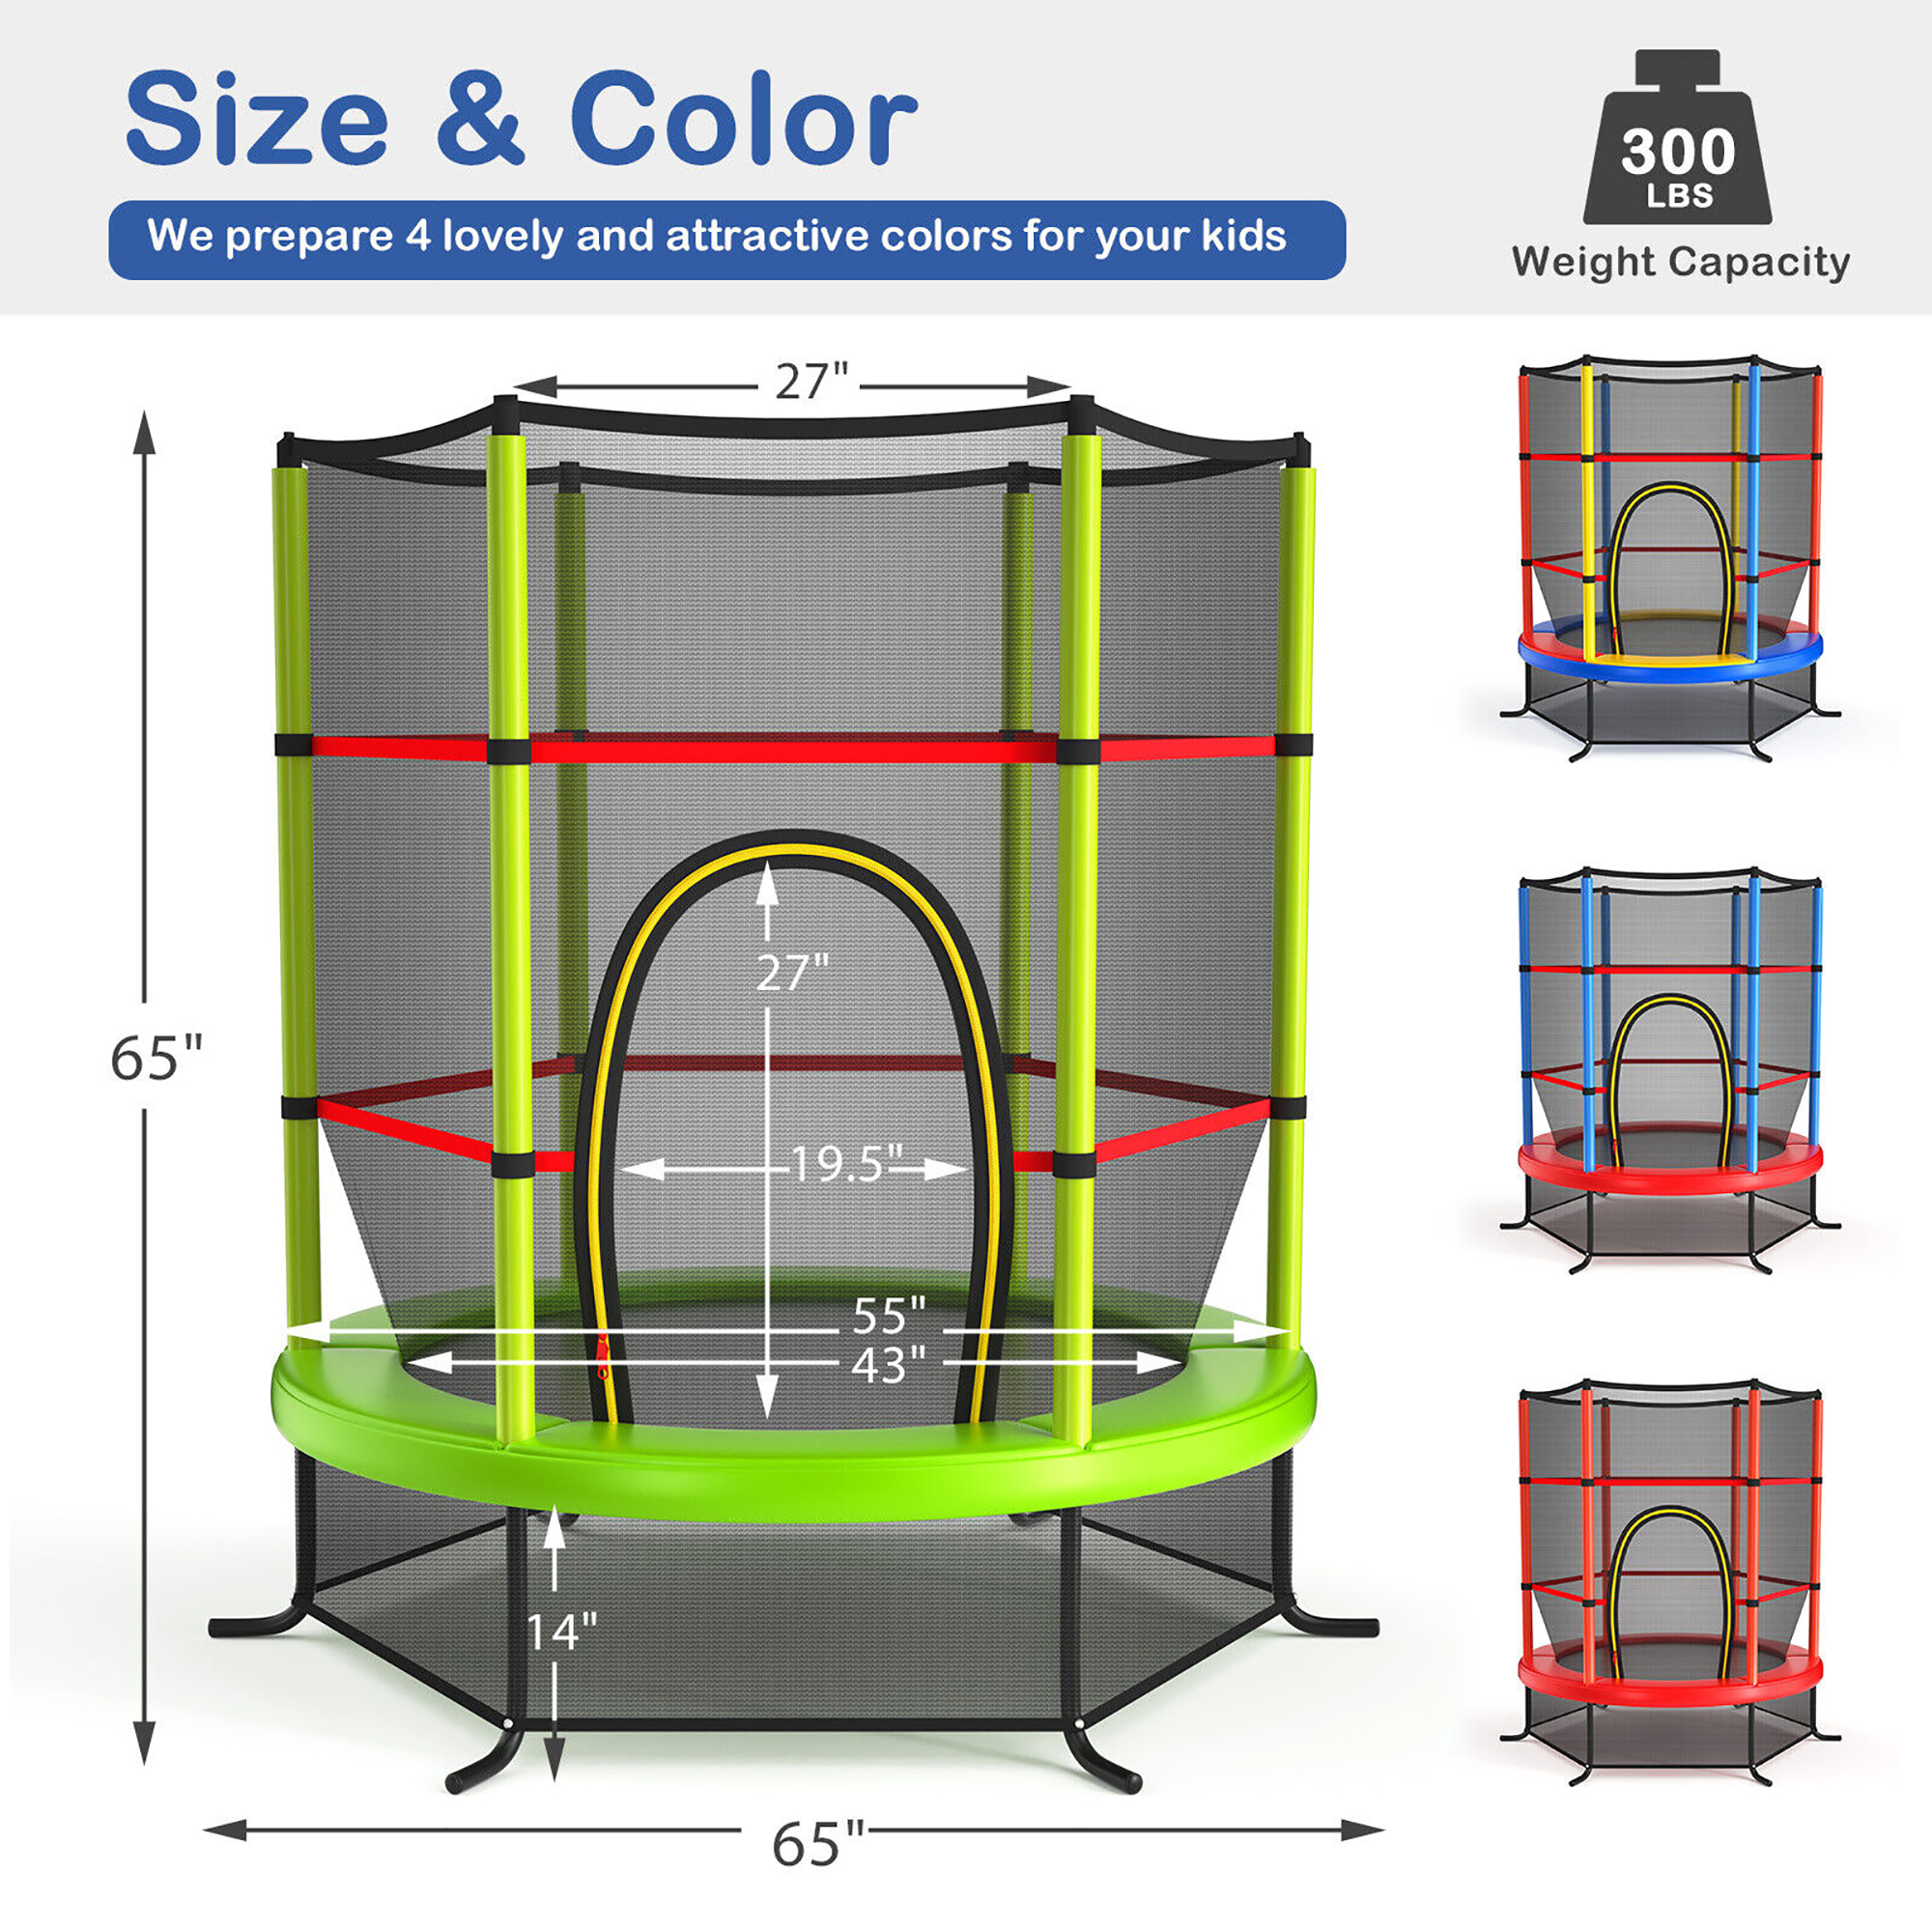 Gymax 55'' Recreational Trampoline for Kids Toddler Trampoline w/ Enclosure Net Green - image 2 of 10